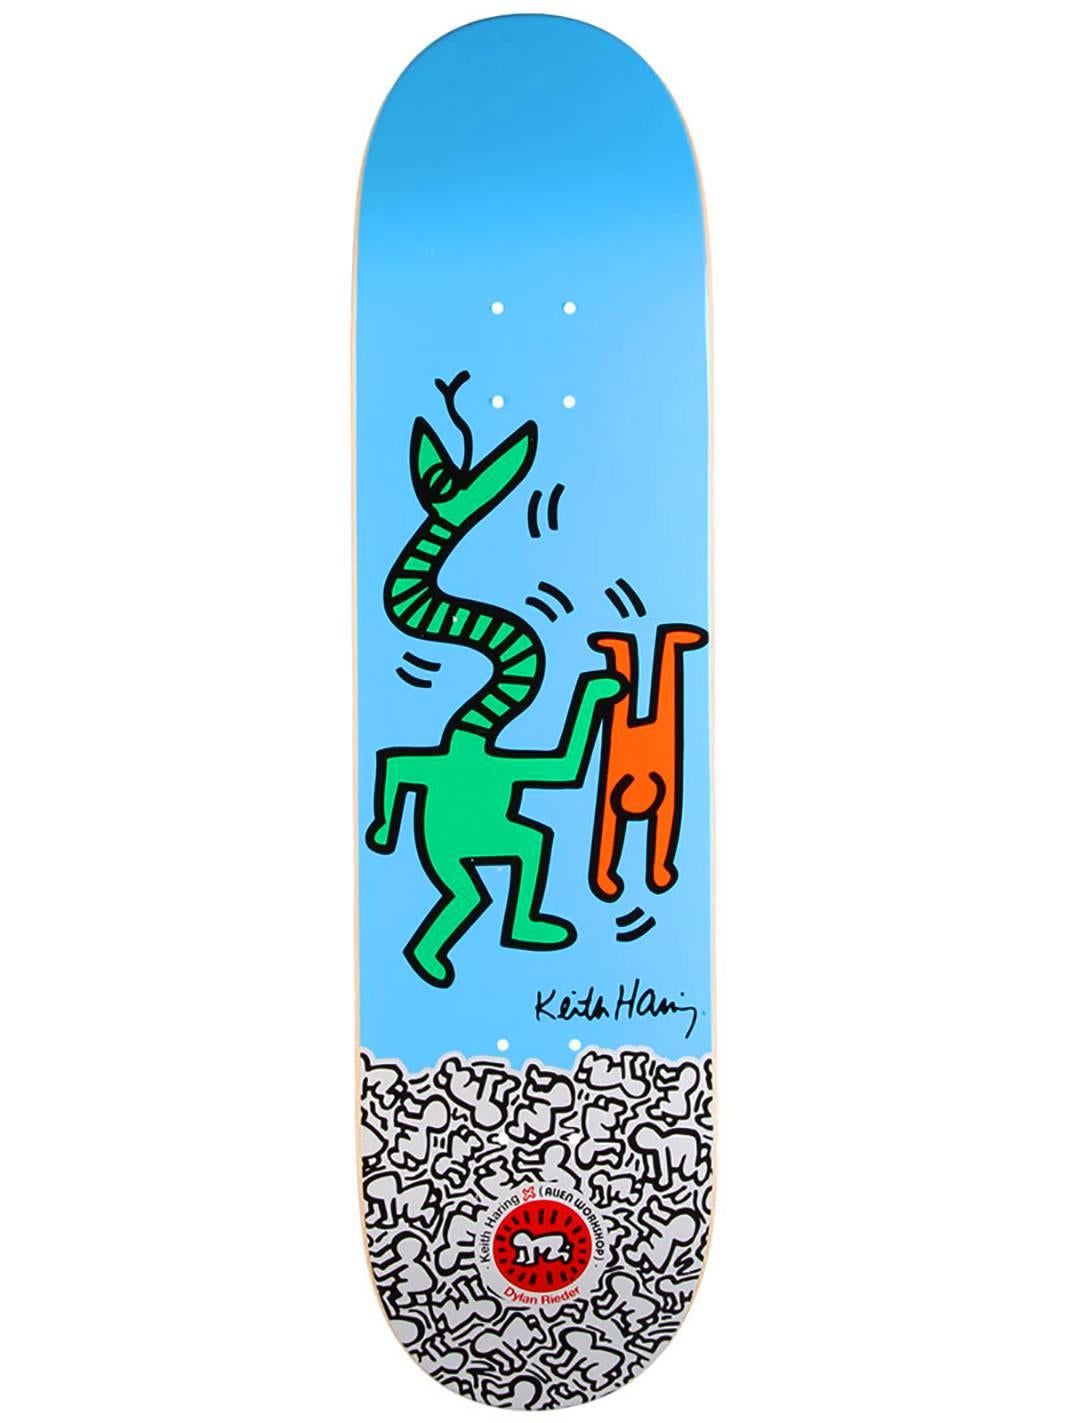 Rare Out of Print Keith Haring Skate Deck featuring one of the artist's most iconic & fun images. This deck is new in its original packaging.

This work originated circa 2012 as a result of the collaboration between Alien Workshop and the Keith